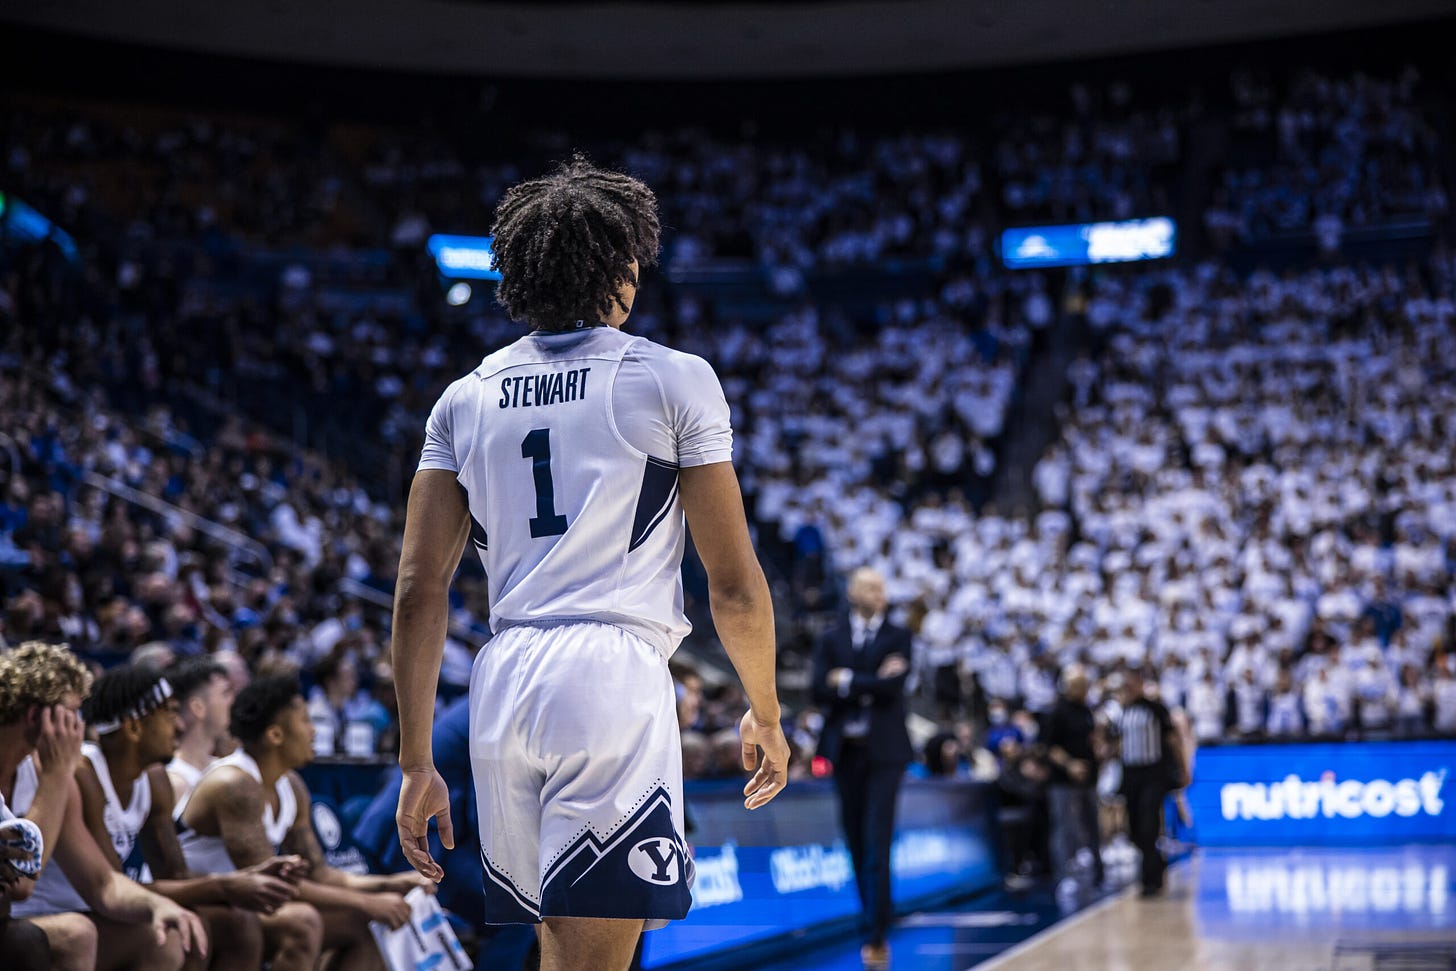 BYU basketball freshman Trey Stewart spreads positivity with shoes, smiles  - The Daily Universe